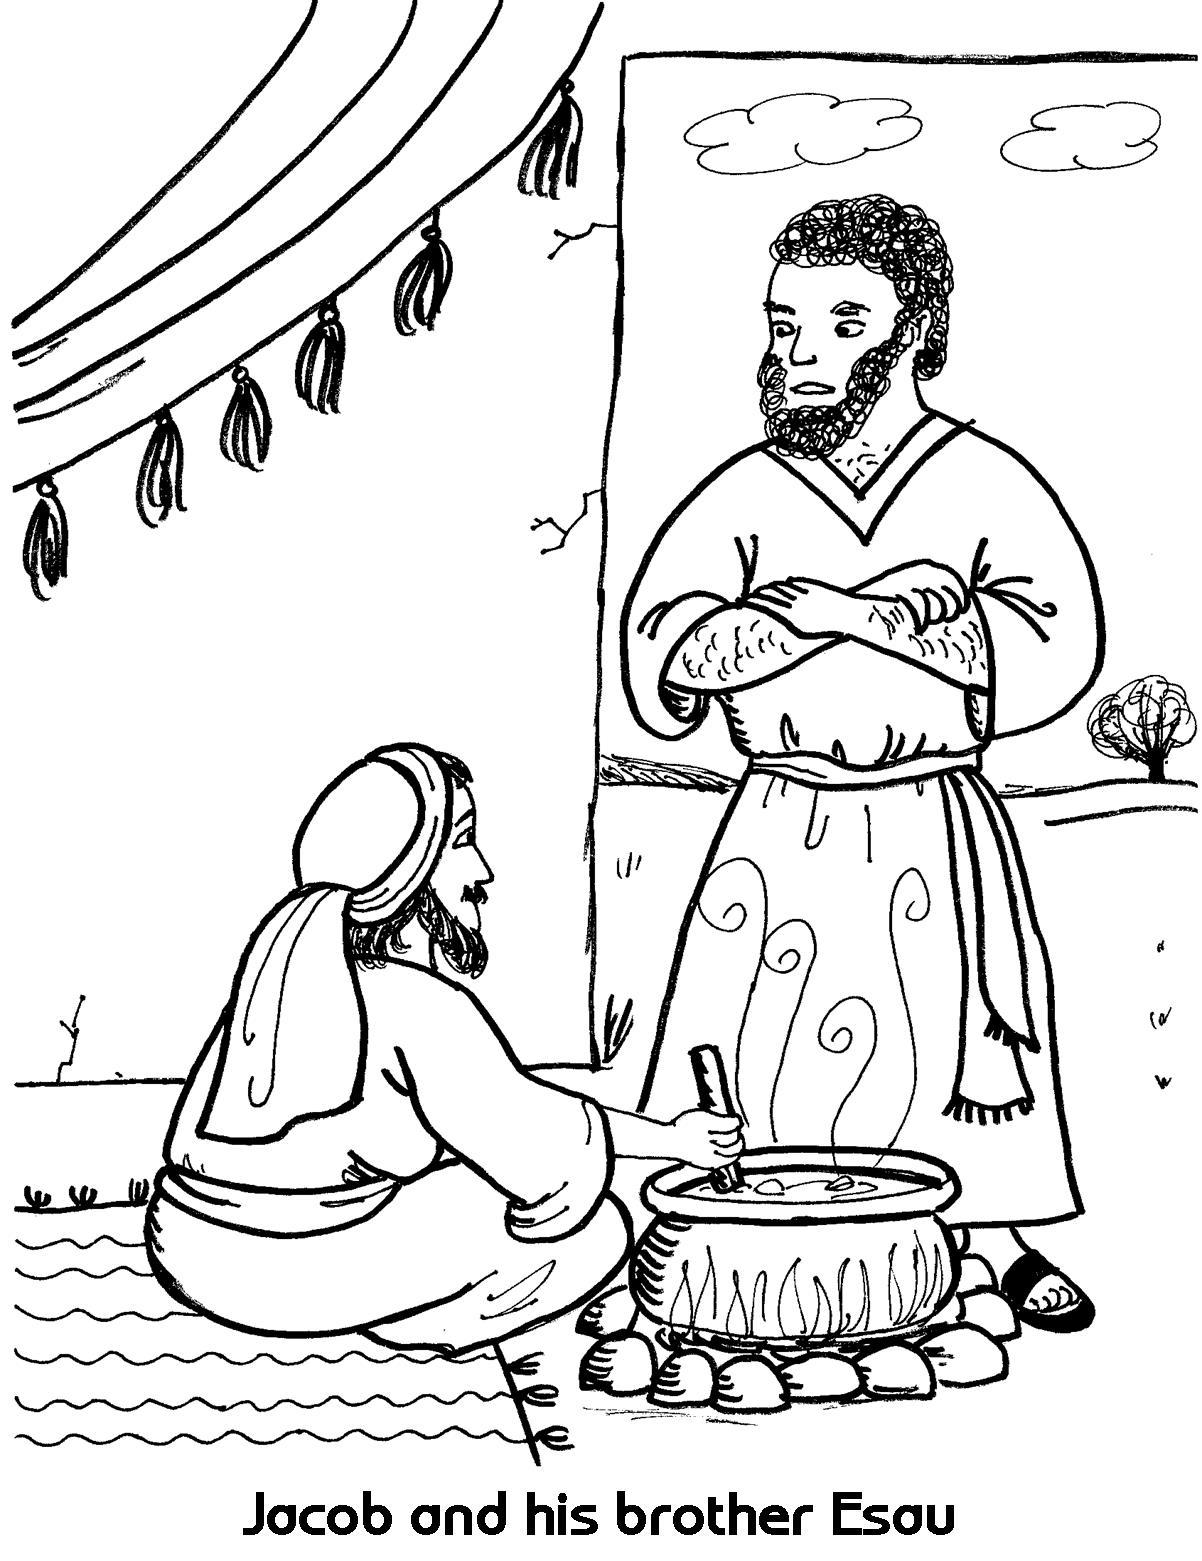 Jacob And Esau Coloring Pages Printable at GetDrawings | Free download